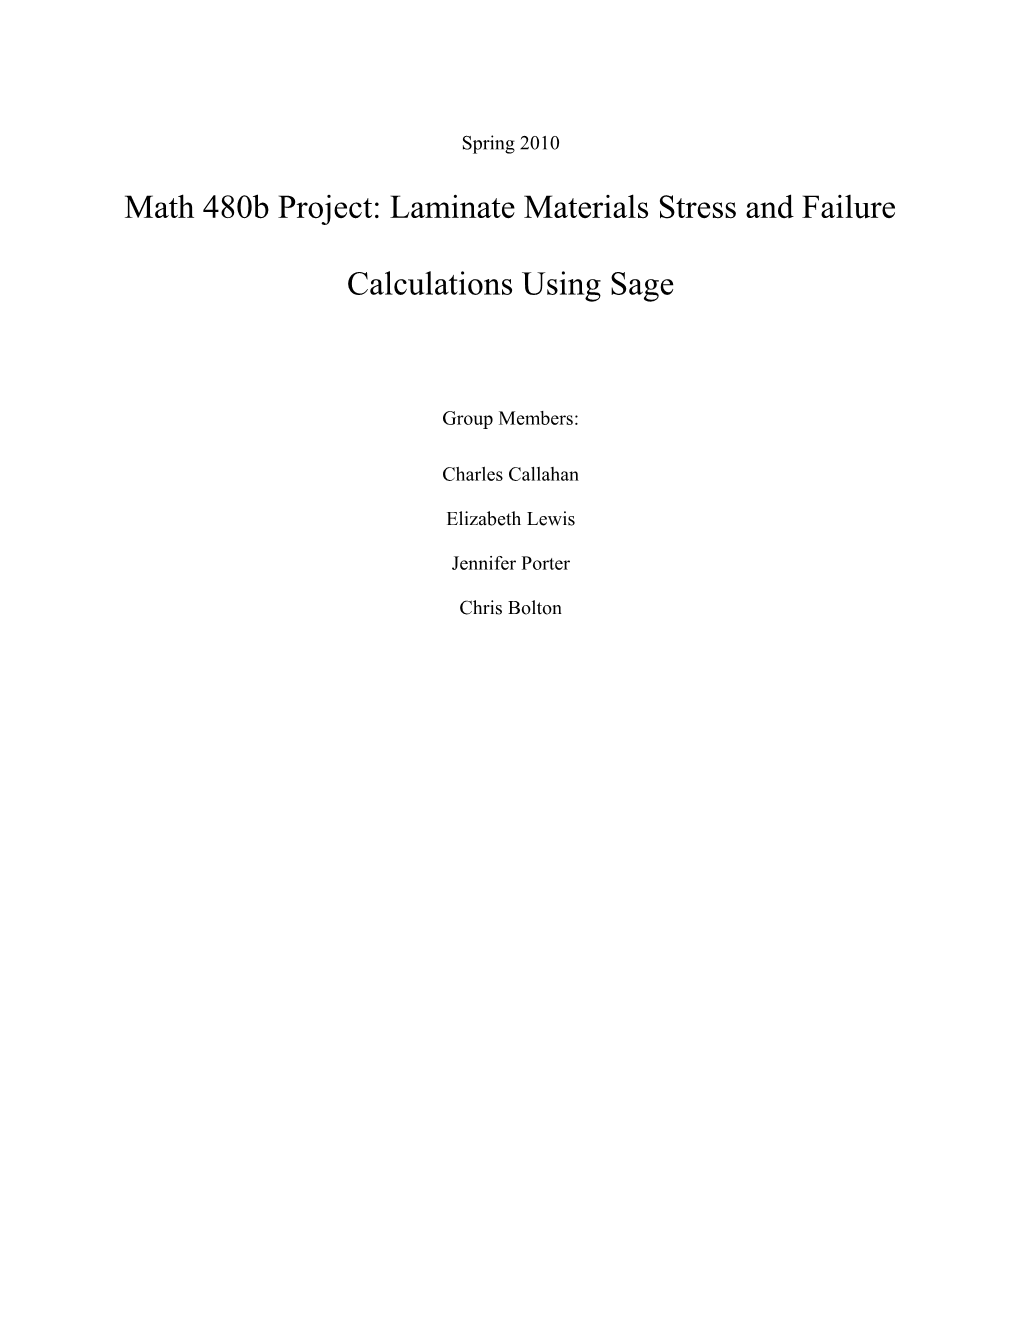 Laminate Materials Stress and Failure Calculations Using Sage